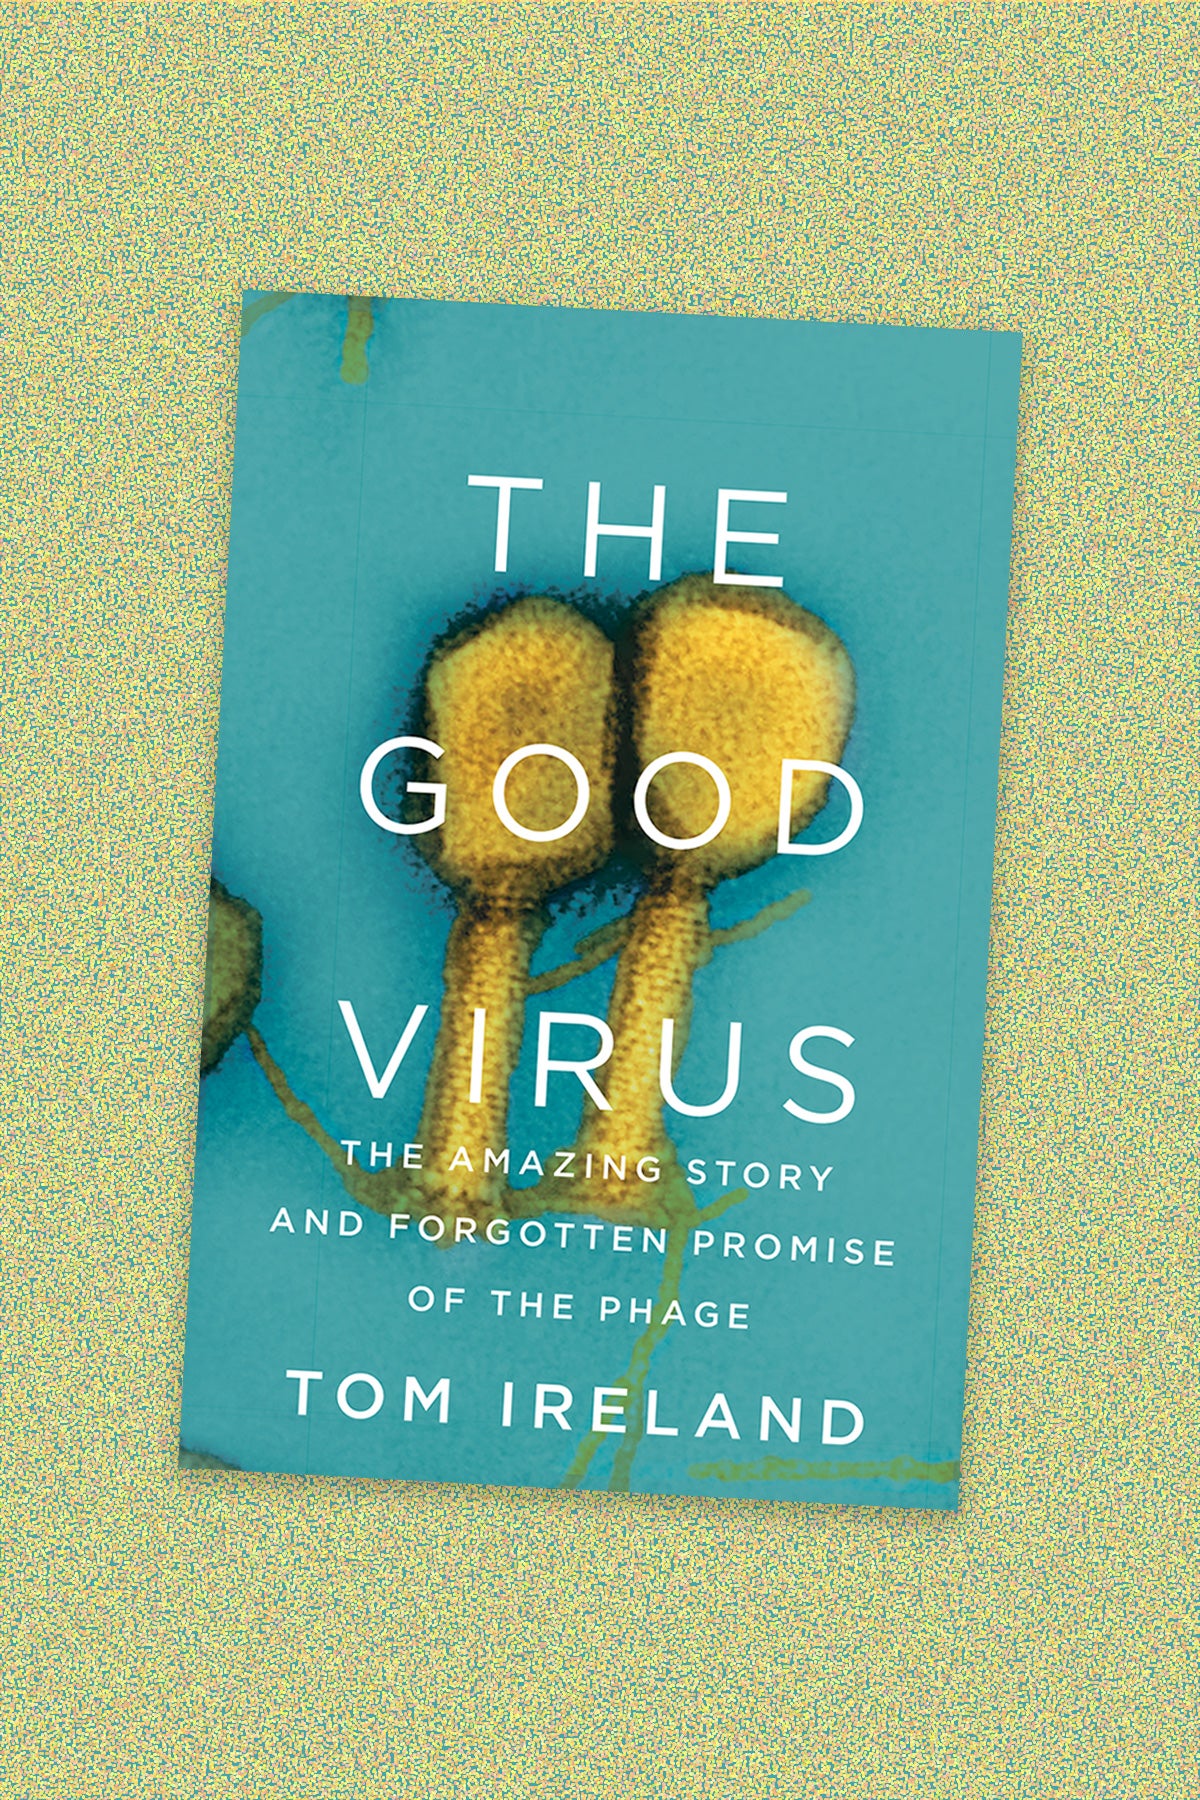 Book cover of “The Good Virus: The amazing story and forgotten promise of the phage” by Tom Ireland. The book cover shows a microscopic image of a yellow phage virus on a teal background. The cover text is white all-caps. The book cover sits on a yellow and teal-speckled background.